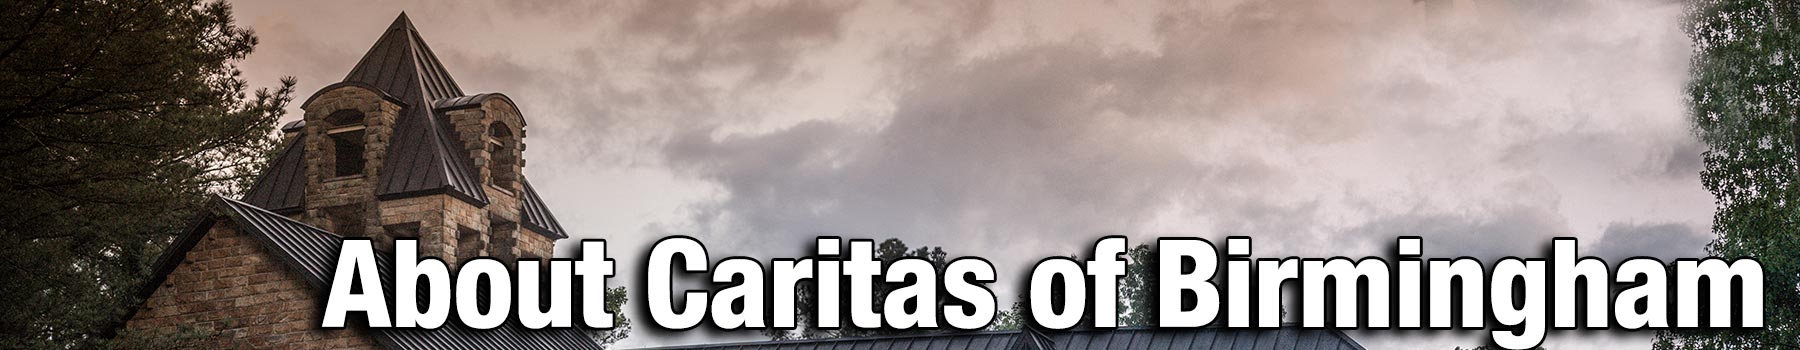 About Caritas